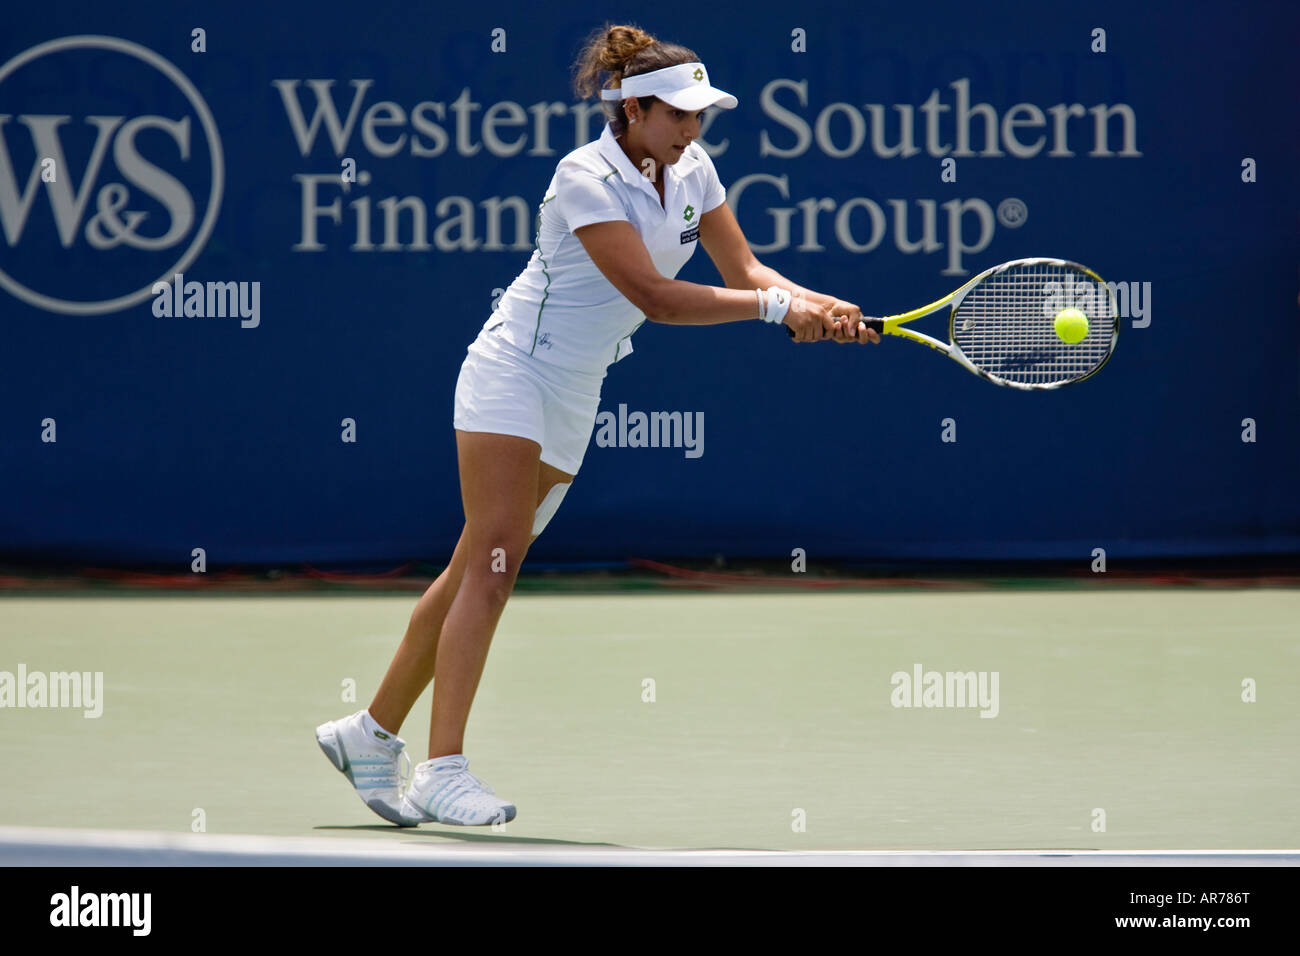 Sania Mirza (IND) of Hyderabad India returns serve in the Western and Southern Tennis tournament Cincinnati Ohio Stock Photo